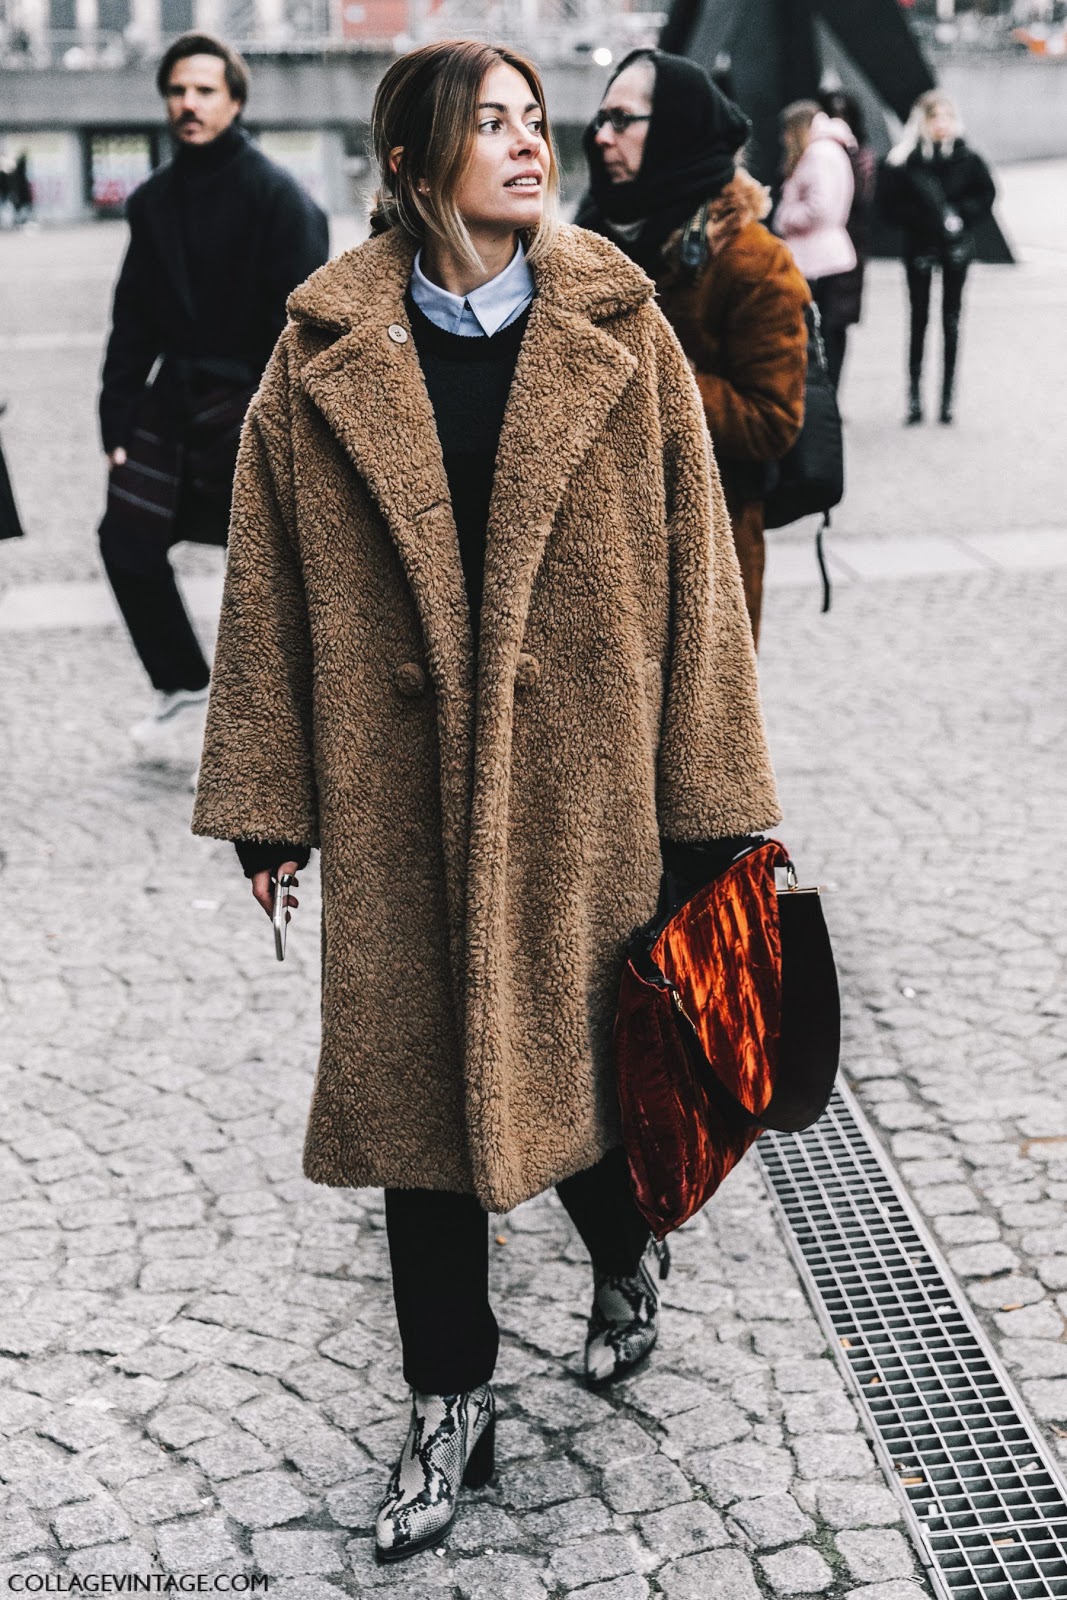 Couture_Paris_Fashion_Week-PFW-Street_Style-Chanel-Vetements-Outfit-Cool_Chic_Style_Fashion-1800x2700